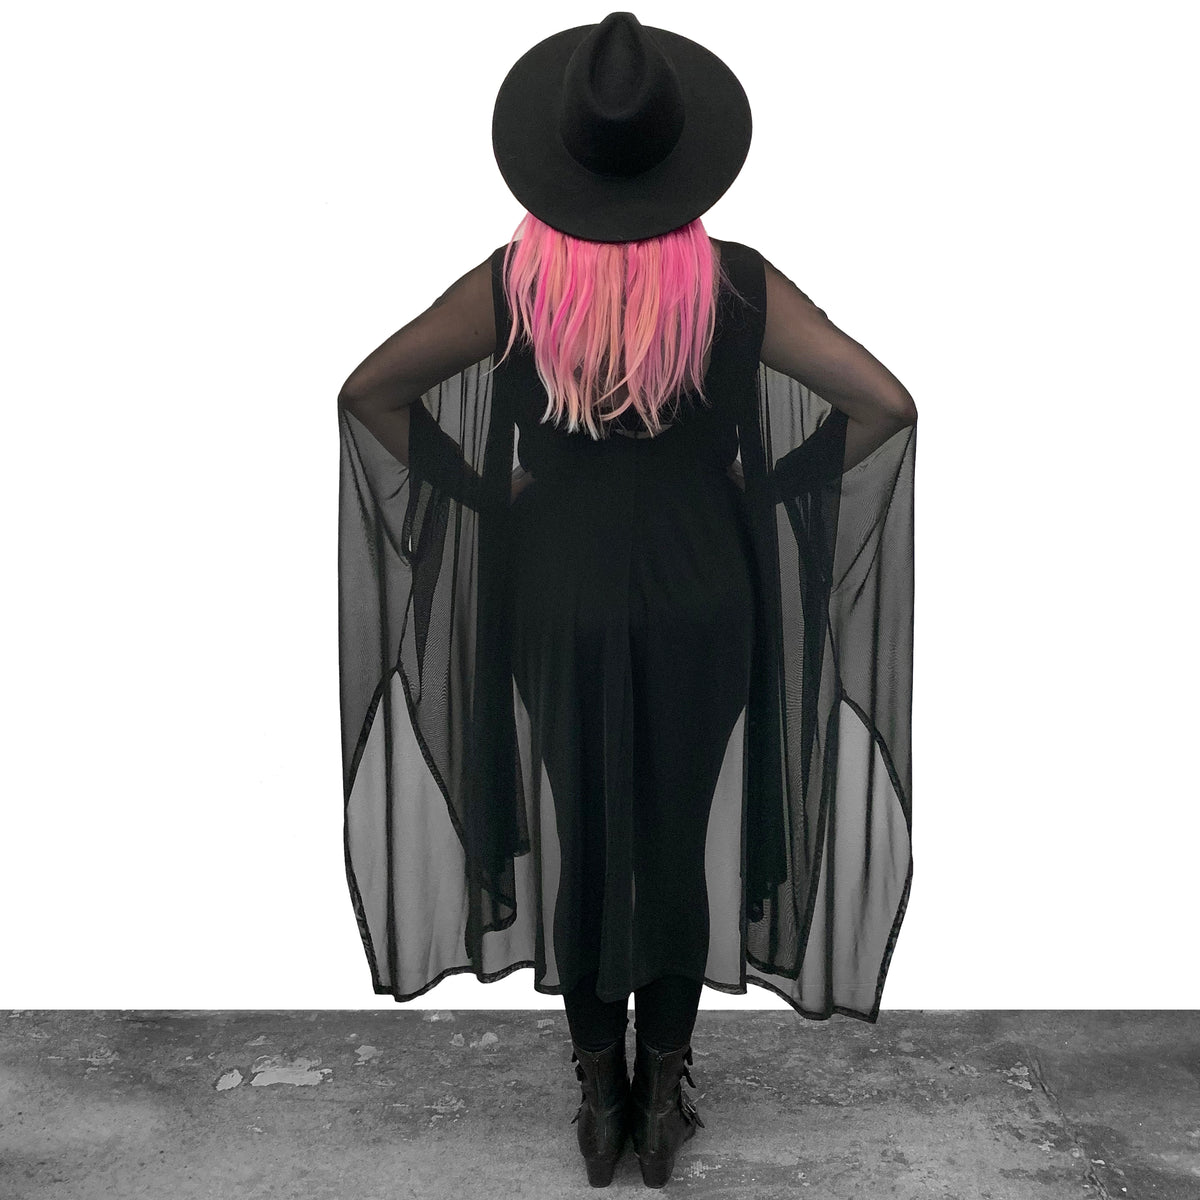 Lilith Mesh Oversized Cloak - Sign up for restock notifications!